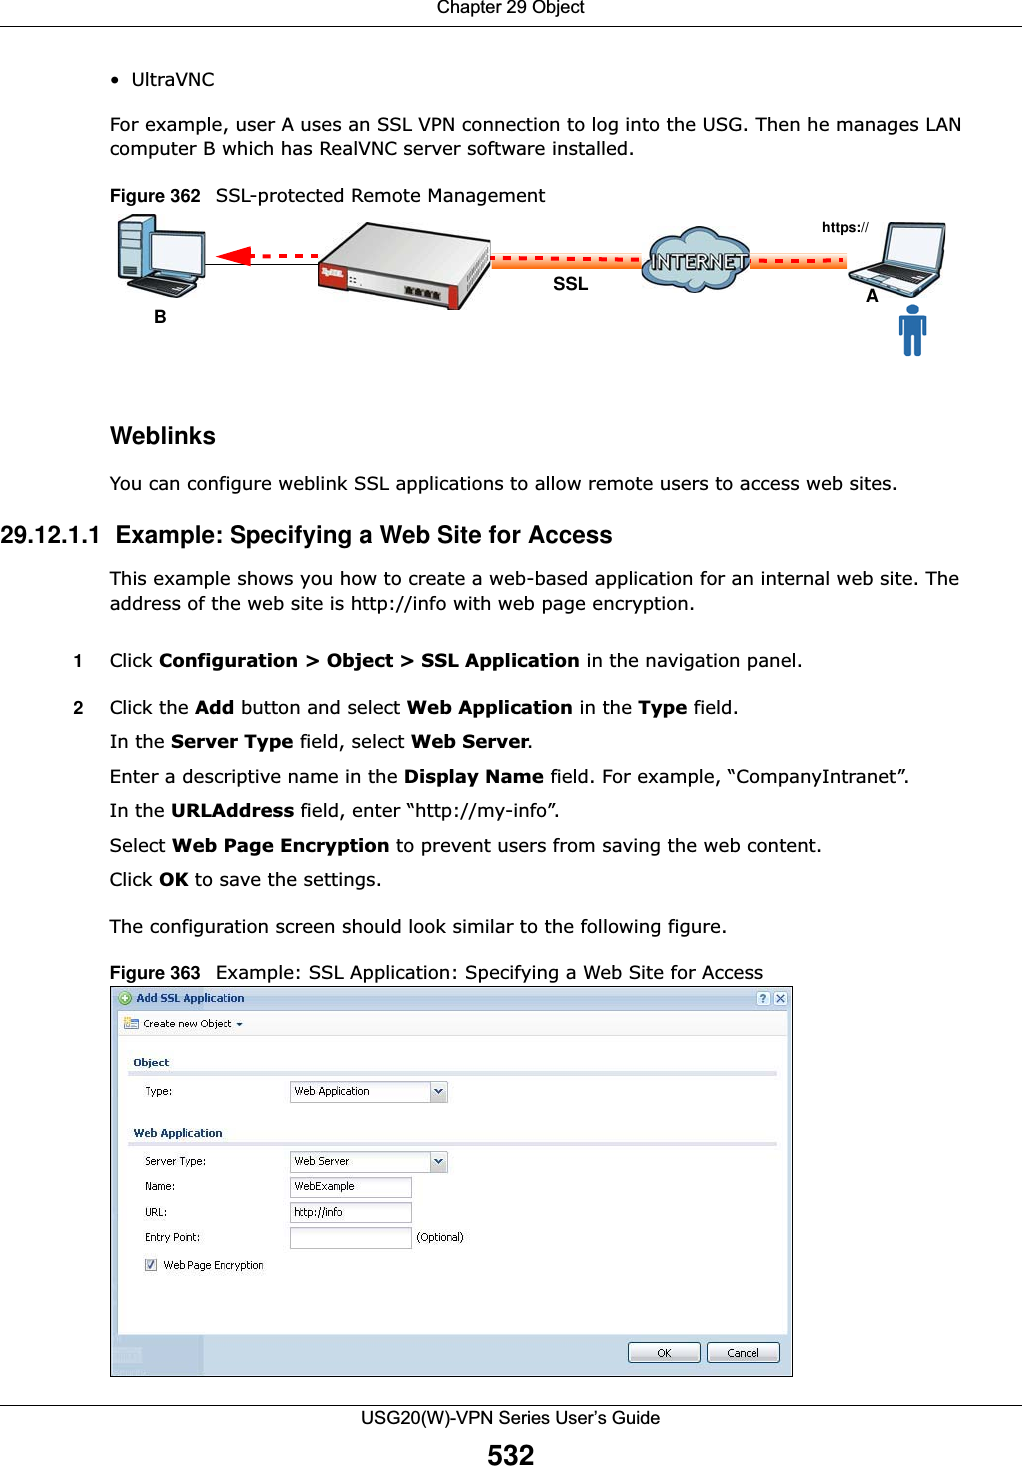 Chapter 29 ObjectUSG20(W)-VPN Series User’s Guide532•UltraVNCFor example, user A uses an SSL VPN connection to log into the USG. Then he manages LAN computer B which has RealVNC server software installed. Figure 362   SSL-protected Remote Management WeblinksYou can configure weblink SSL applications to allow remote users to access web sites. 29.12.1.1  Example: Specifying a Web Site for AccessThis example shows you how to create a web-based application for an internal web site. The address of the web site is http://info with web page encryption. 1Click Configuration &gt; Object &gt; SSL Application in the navigation panel. 2Click the Add button and select Web Application in the Type field. In the Server Type field, select Web Server. Enter a descriptive name in the Display Name field. For example, “CompanyIntranet”. In the URLAddress field, enter “http://my-info”. Select Web Page Encryption to prevent users from saving the web content. Click OK to save the settings. The configuration screen should look similar to the following figure. Figure 363   Example: SSL Application: Specifying a Web Site for Access https://ASSLB